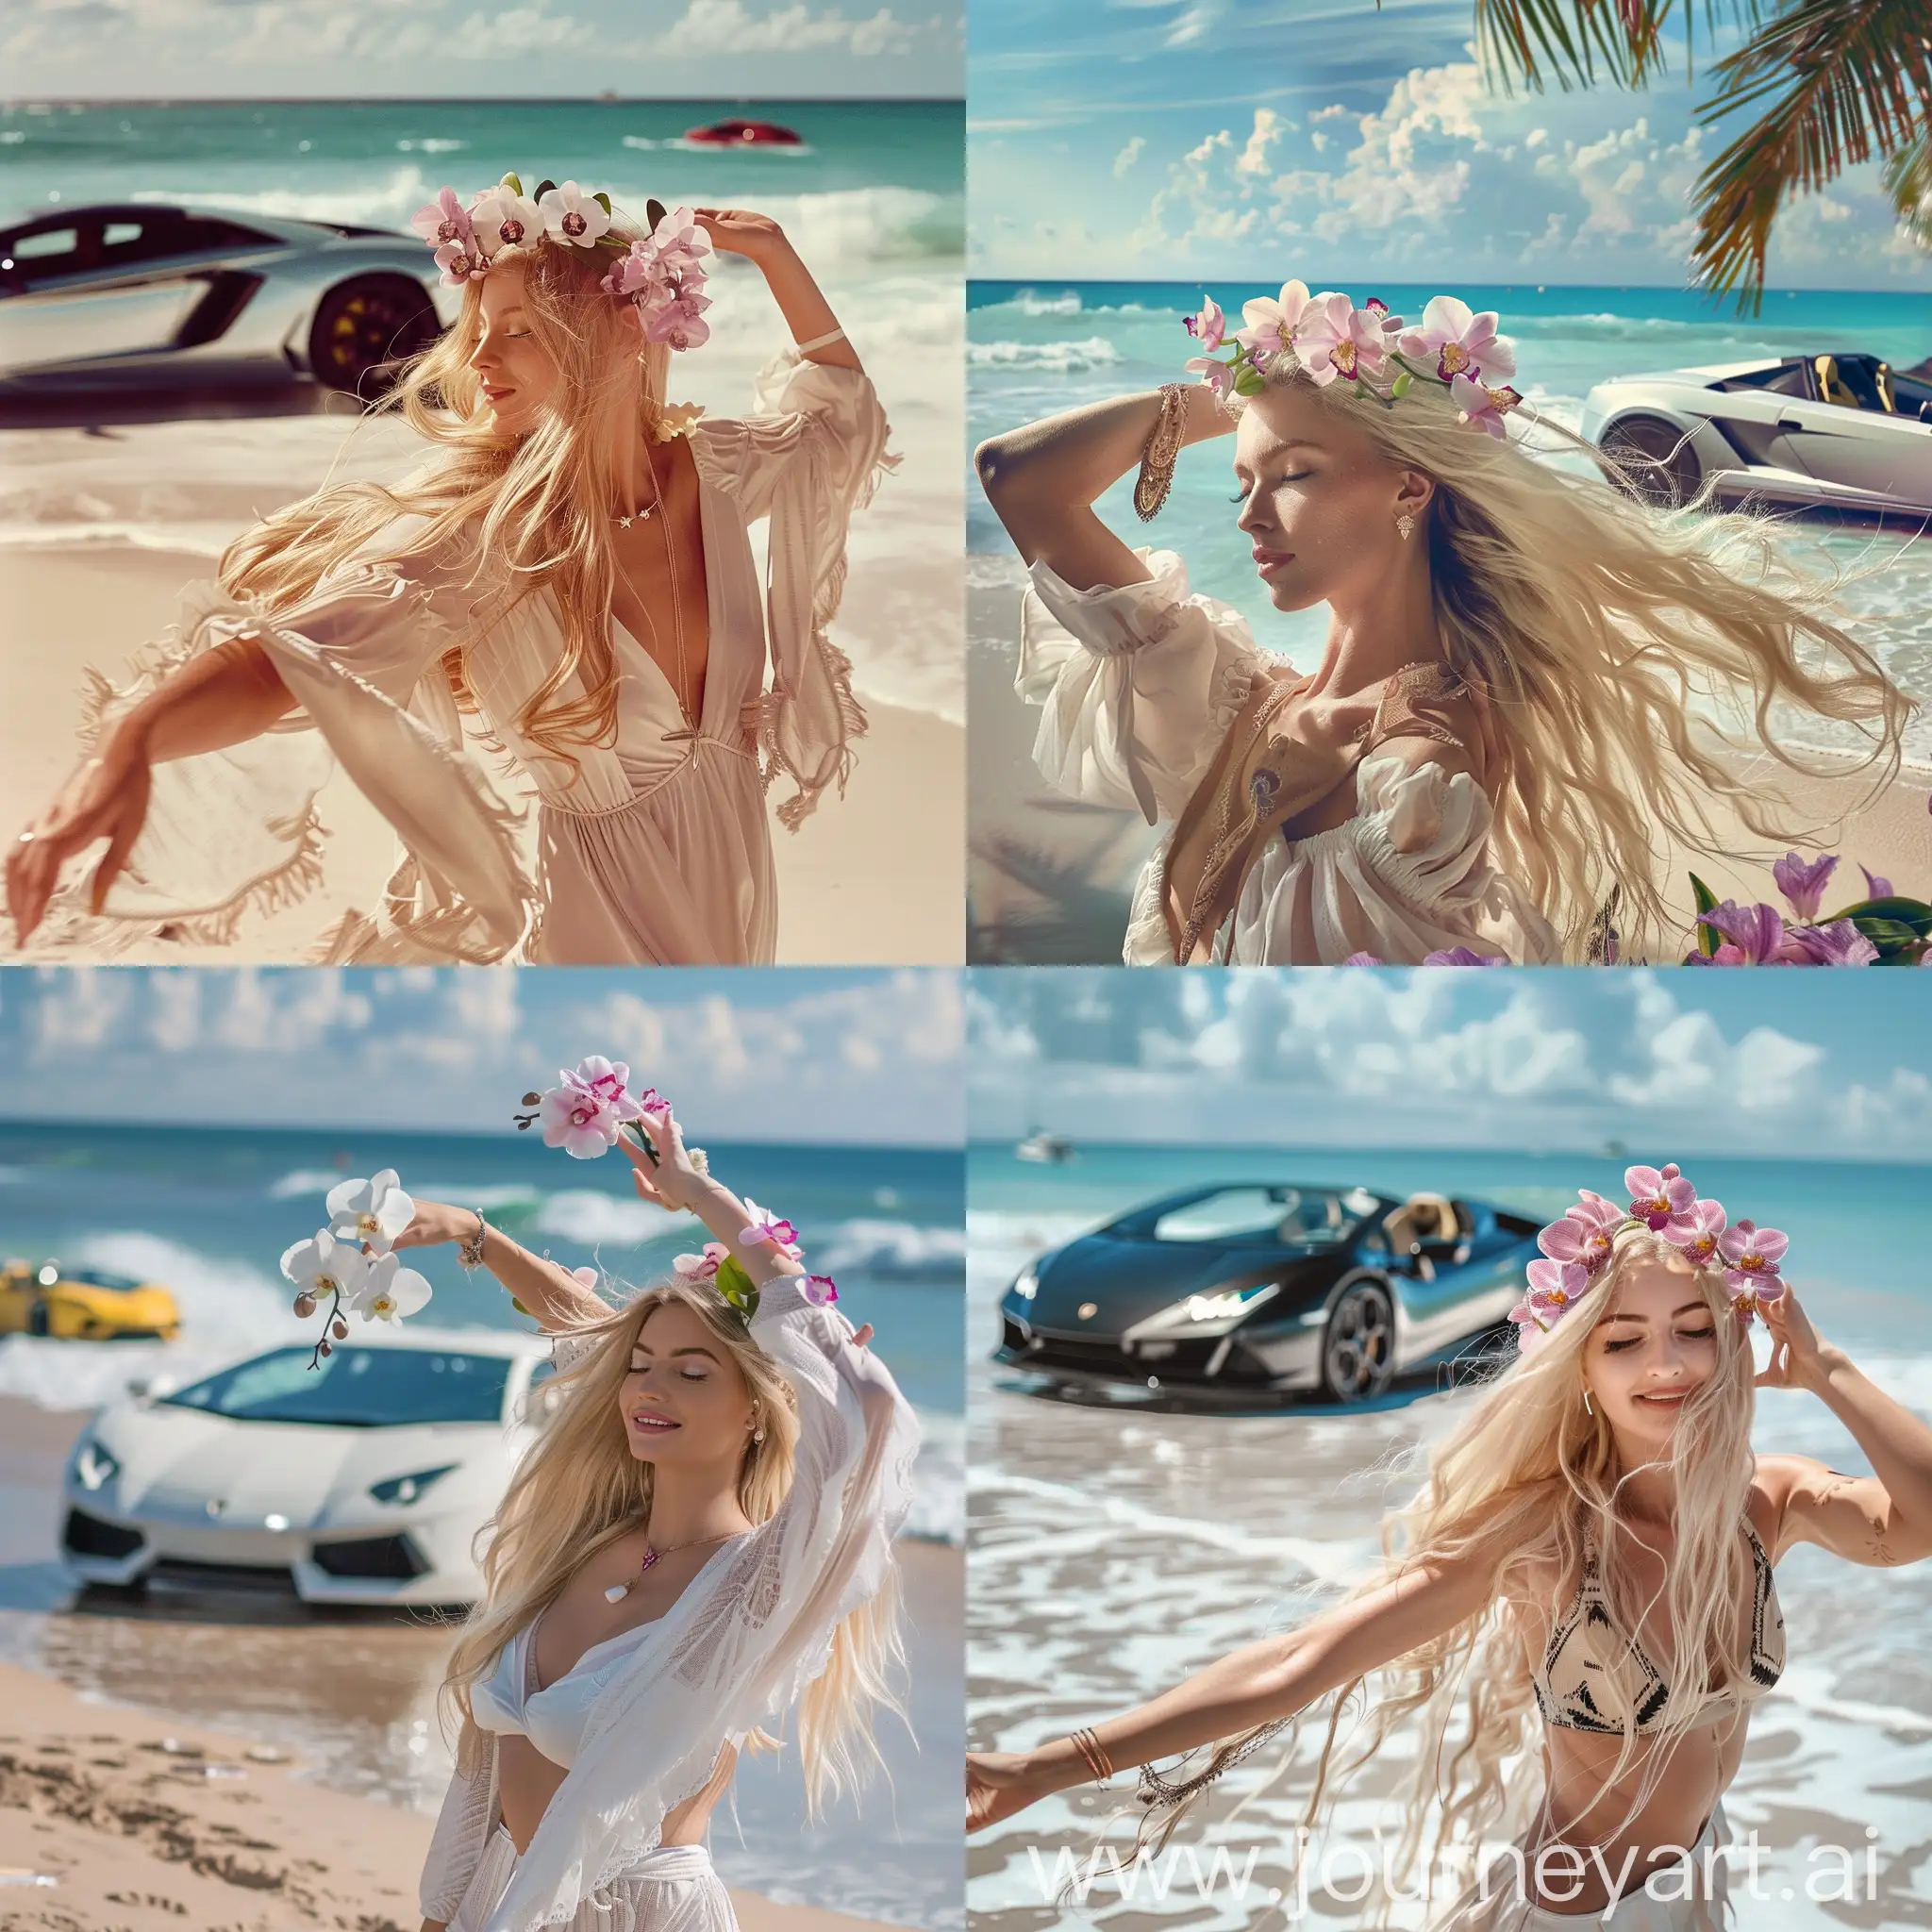 Blonde-Girl-Dancing-with-Orchids-on-Beach-with-Lambo-in-Background